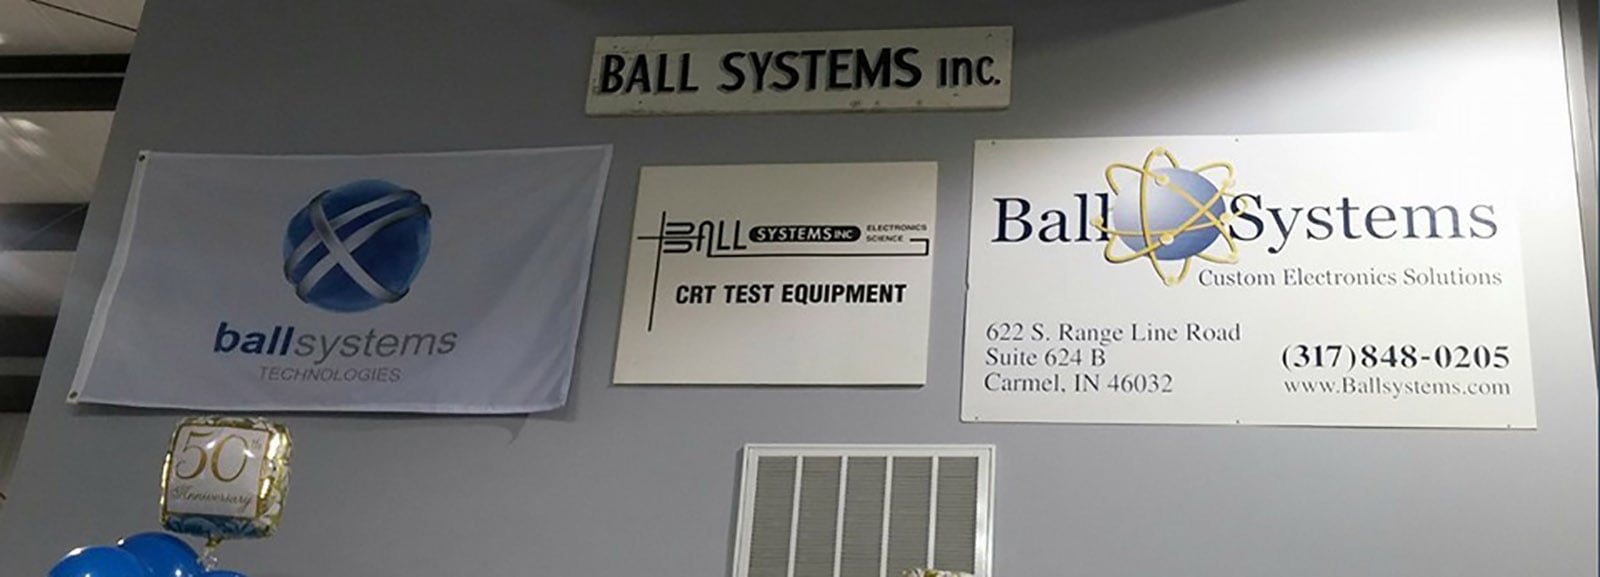 Ball Systems history